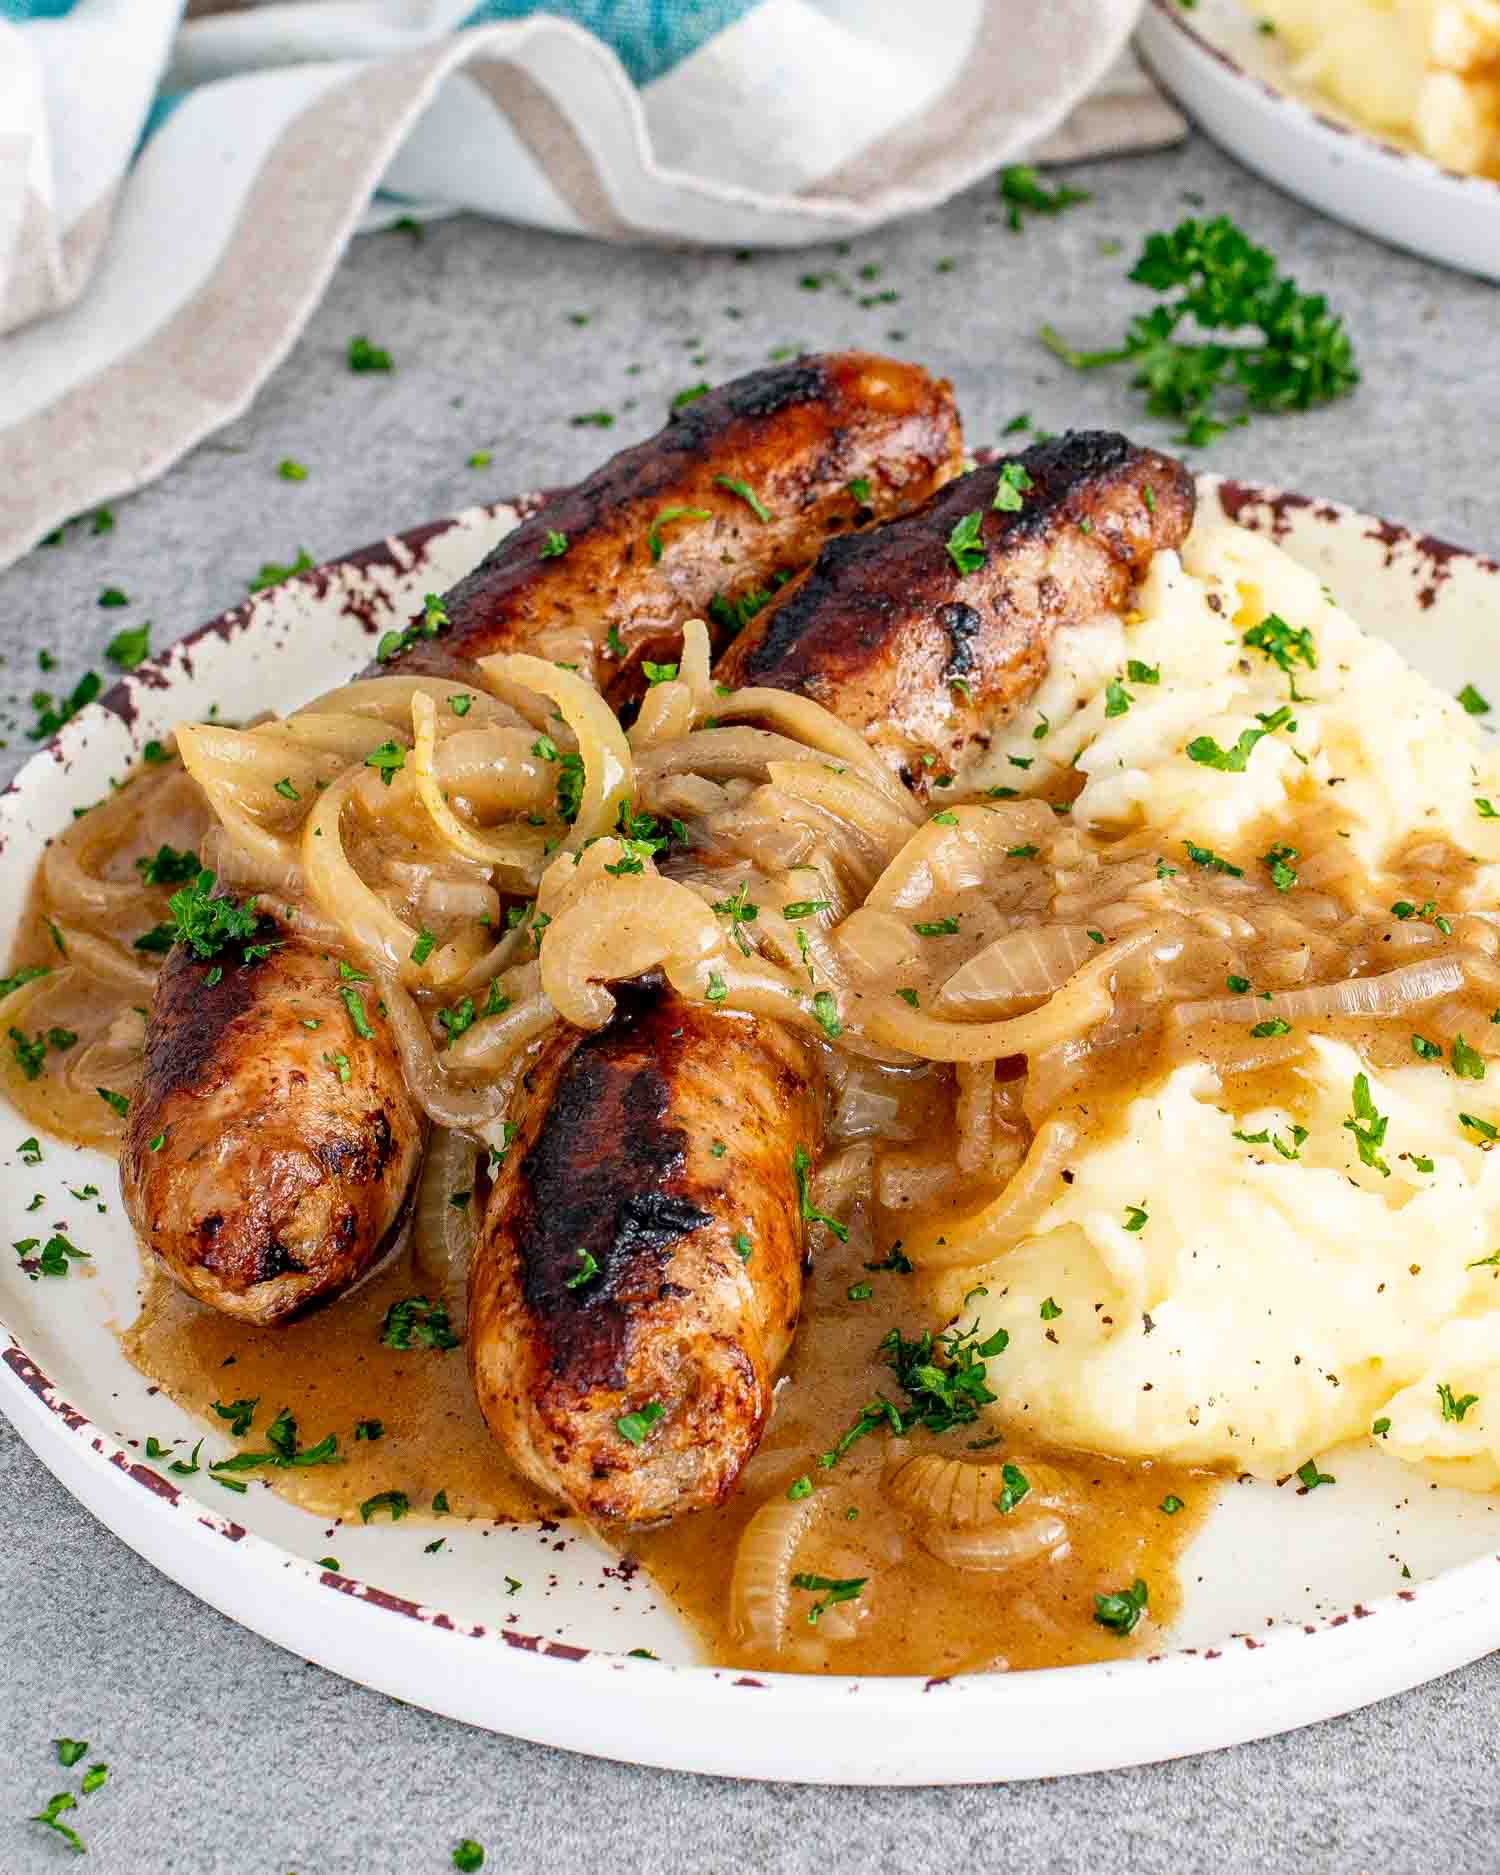 a serving of bangers and mash with onion gravy on a white plate garnished with parsley.